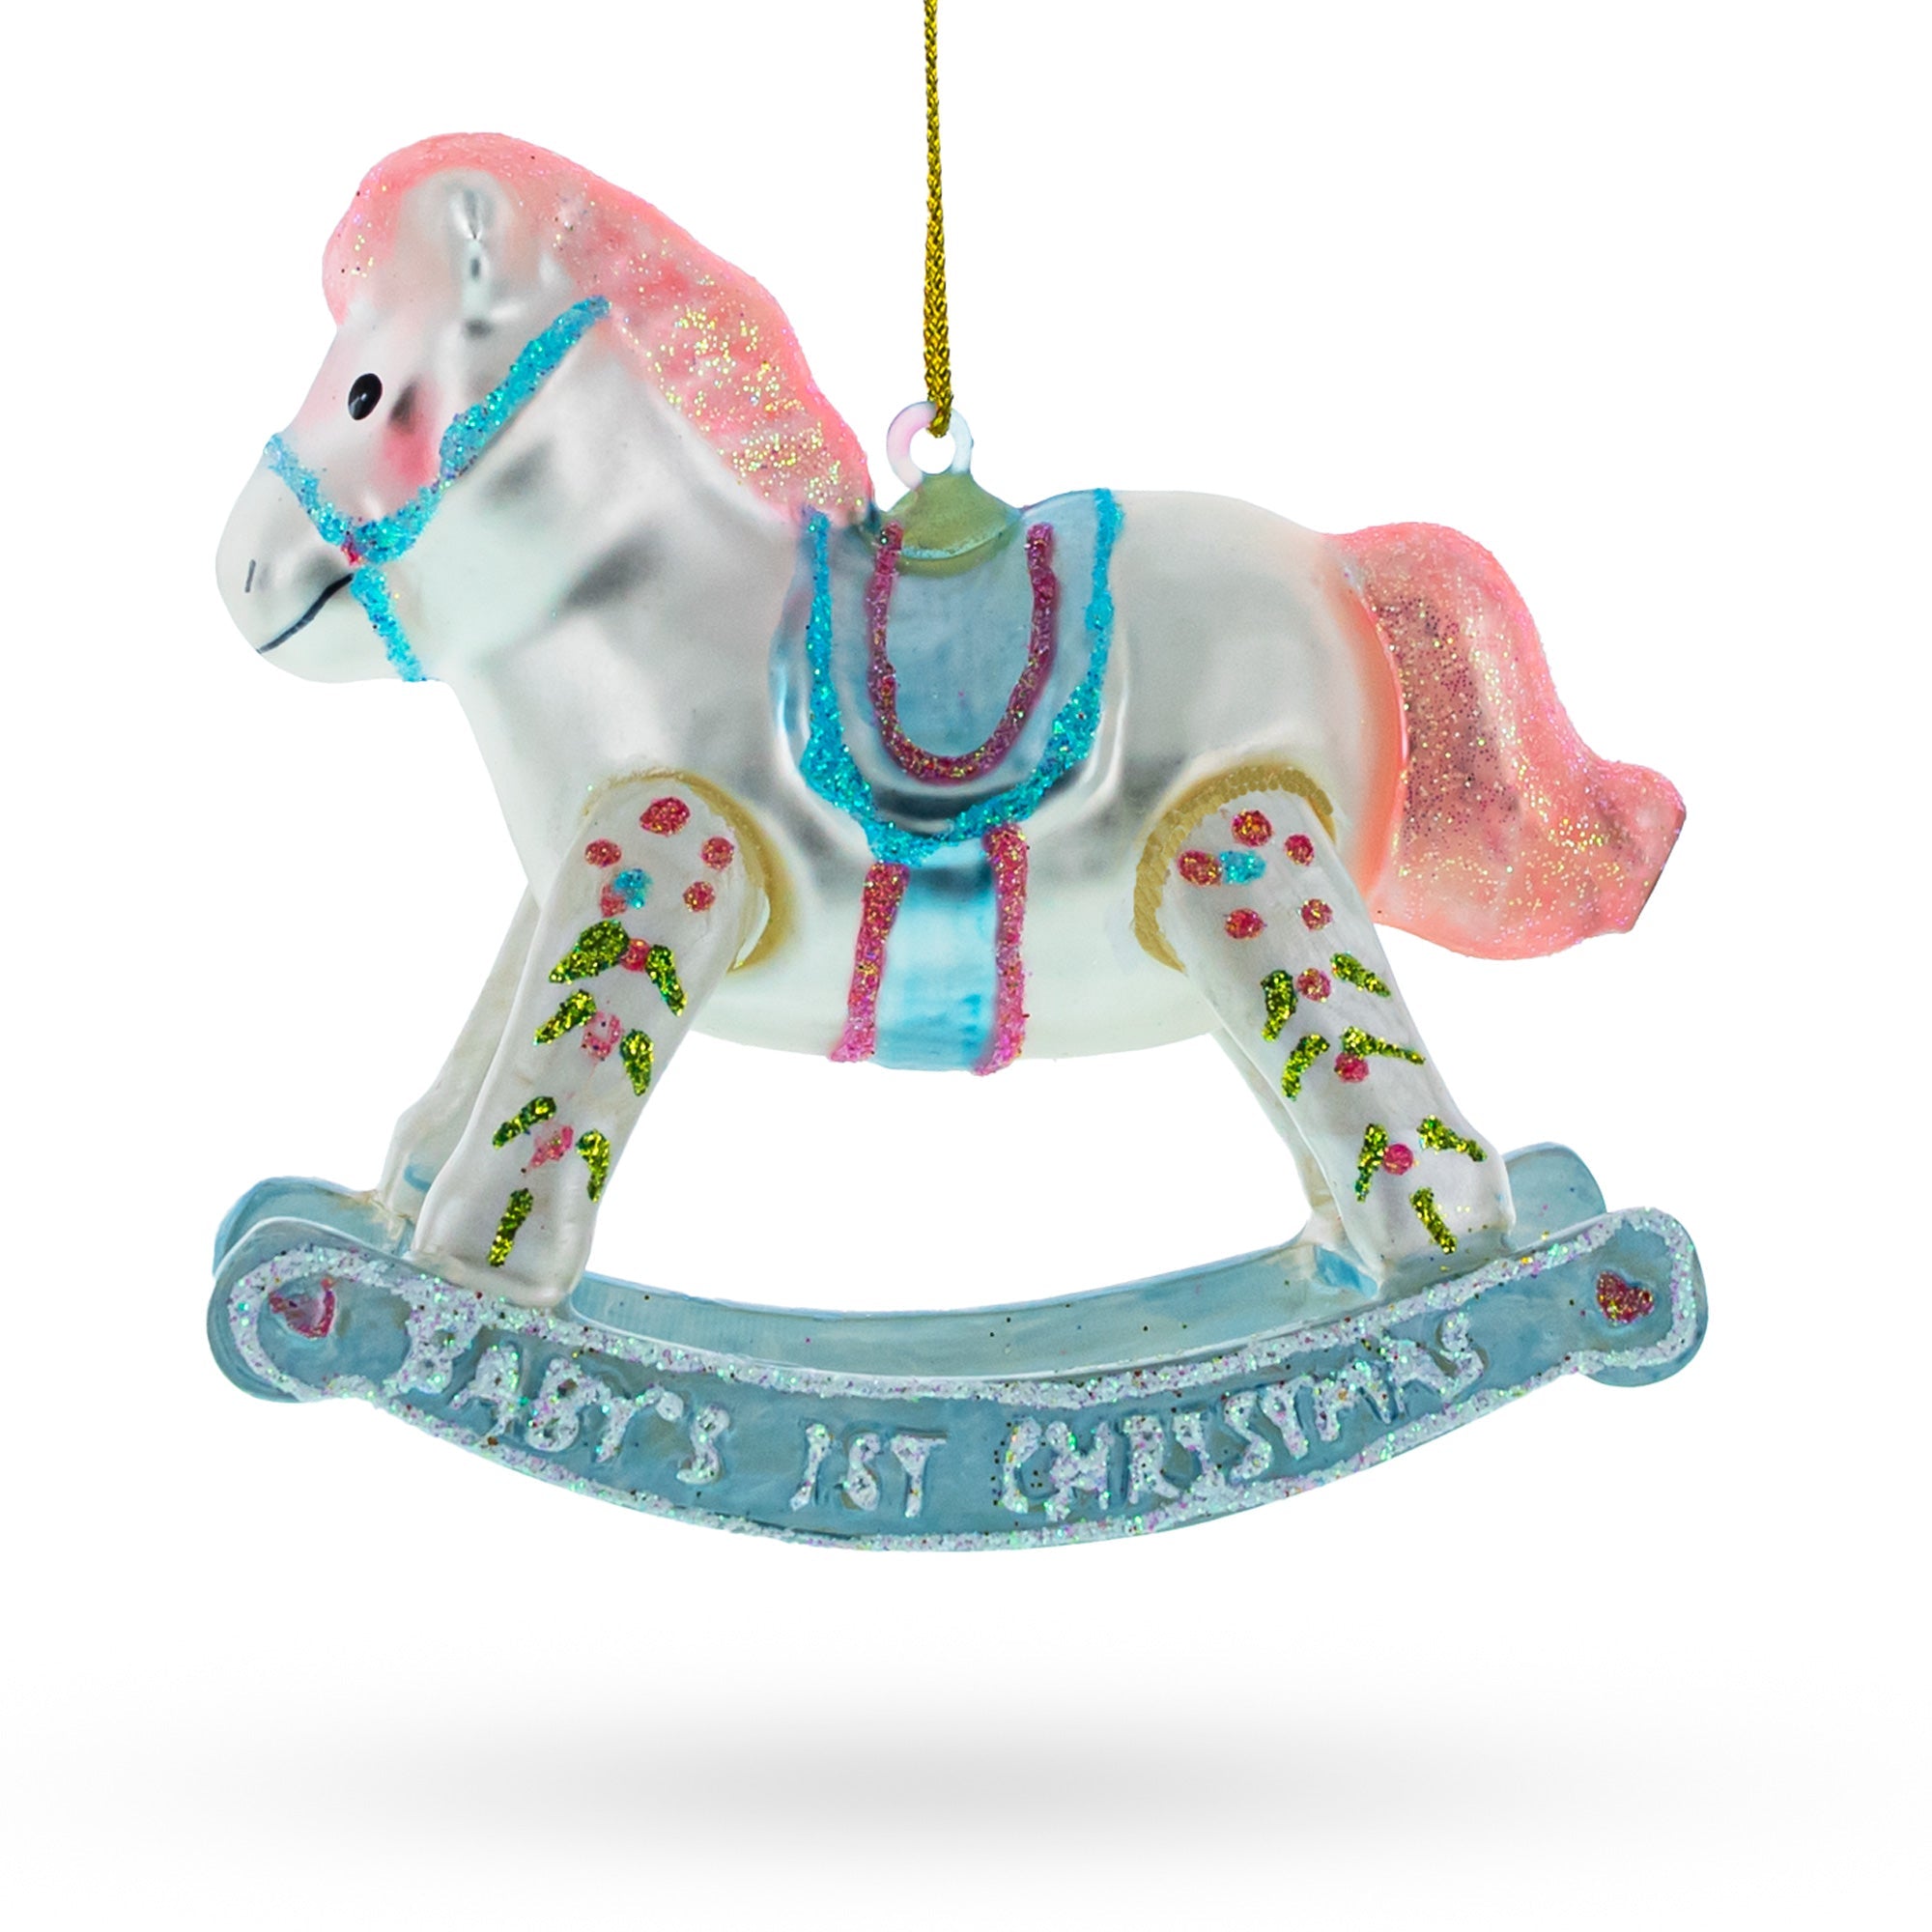 Baby Boy's Blue Rocking Horse - Lovable Blown Glass Christmas Ornament